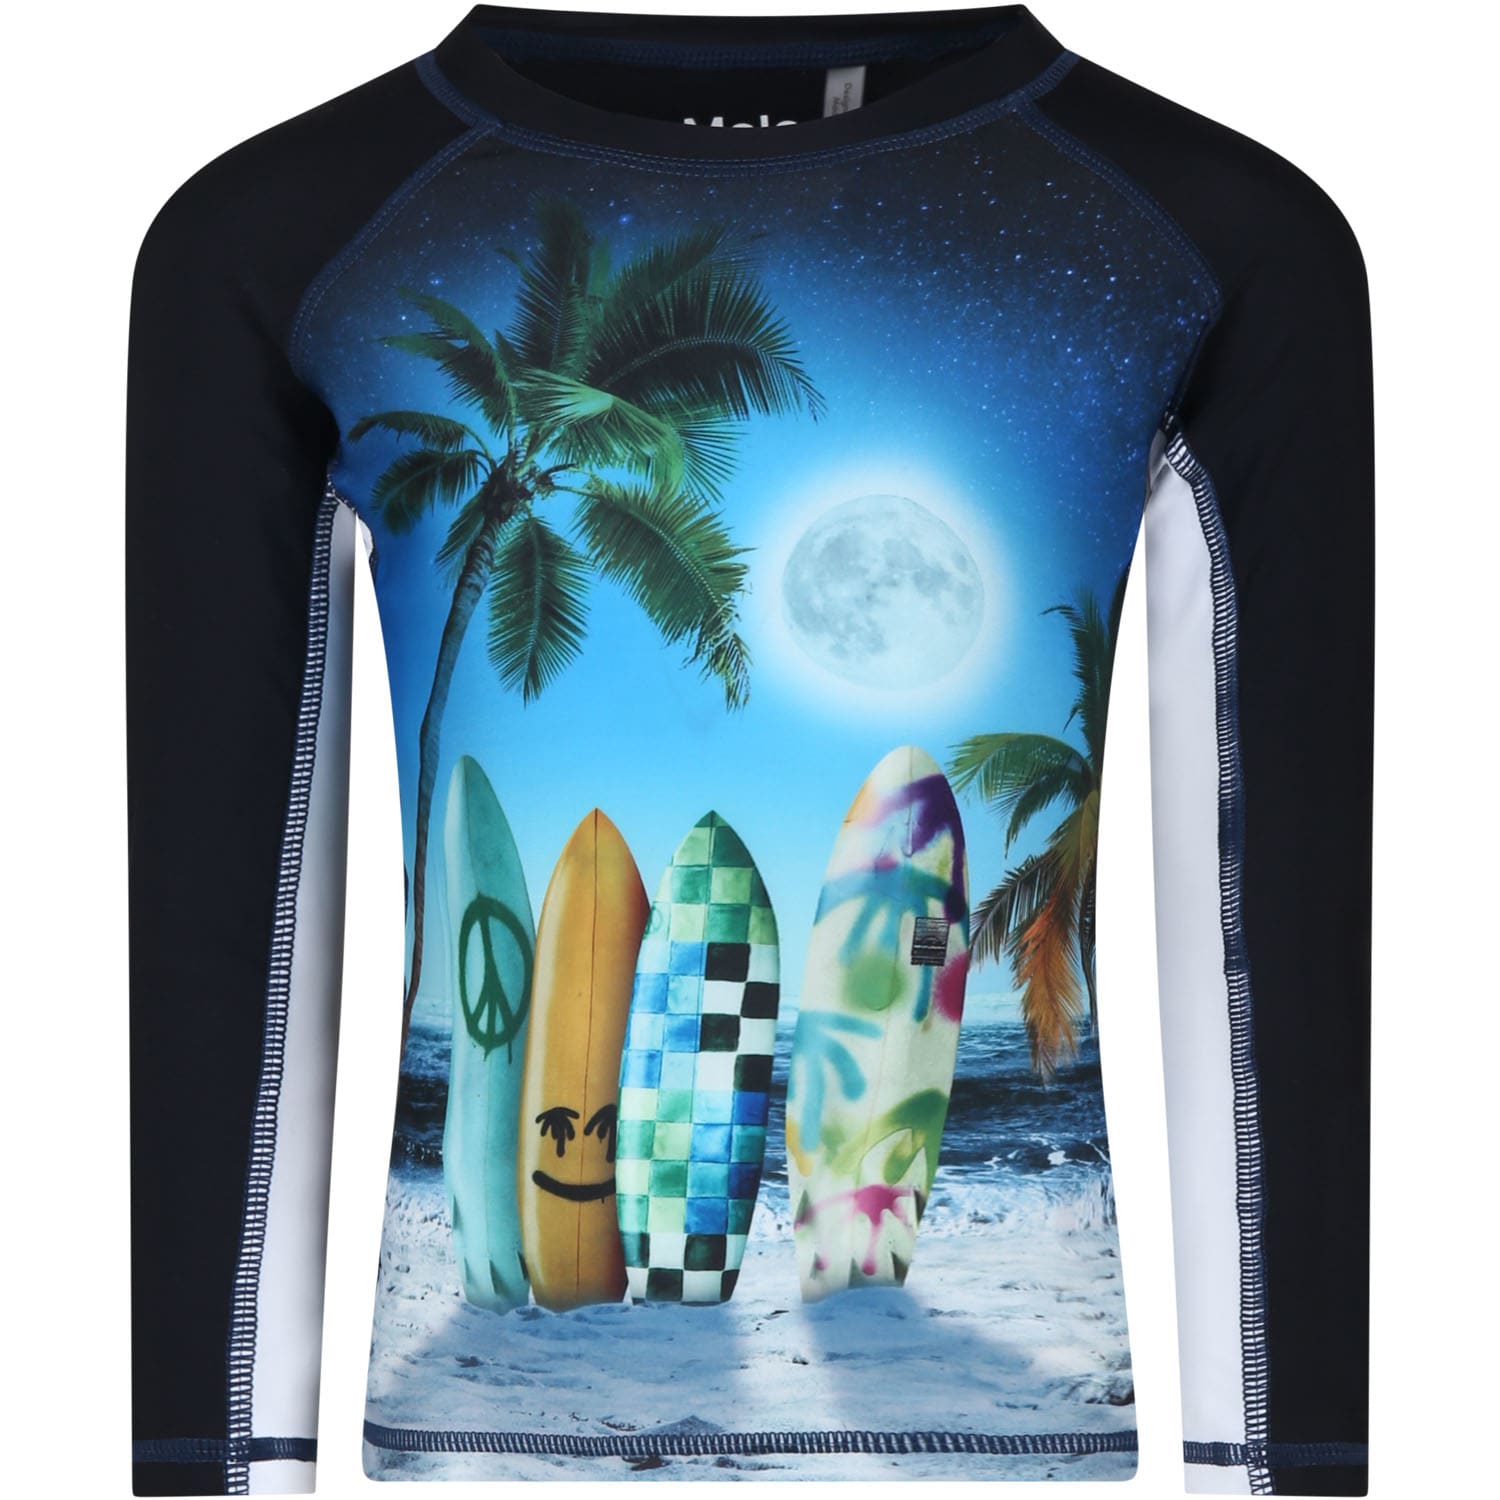 Molo Kids' Black T-shirt For Boy With Surfboard Print